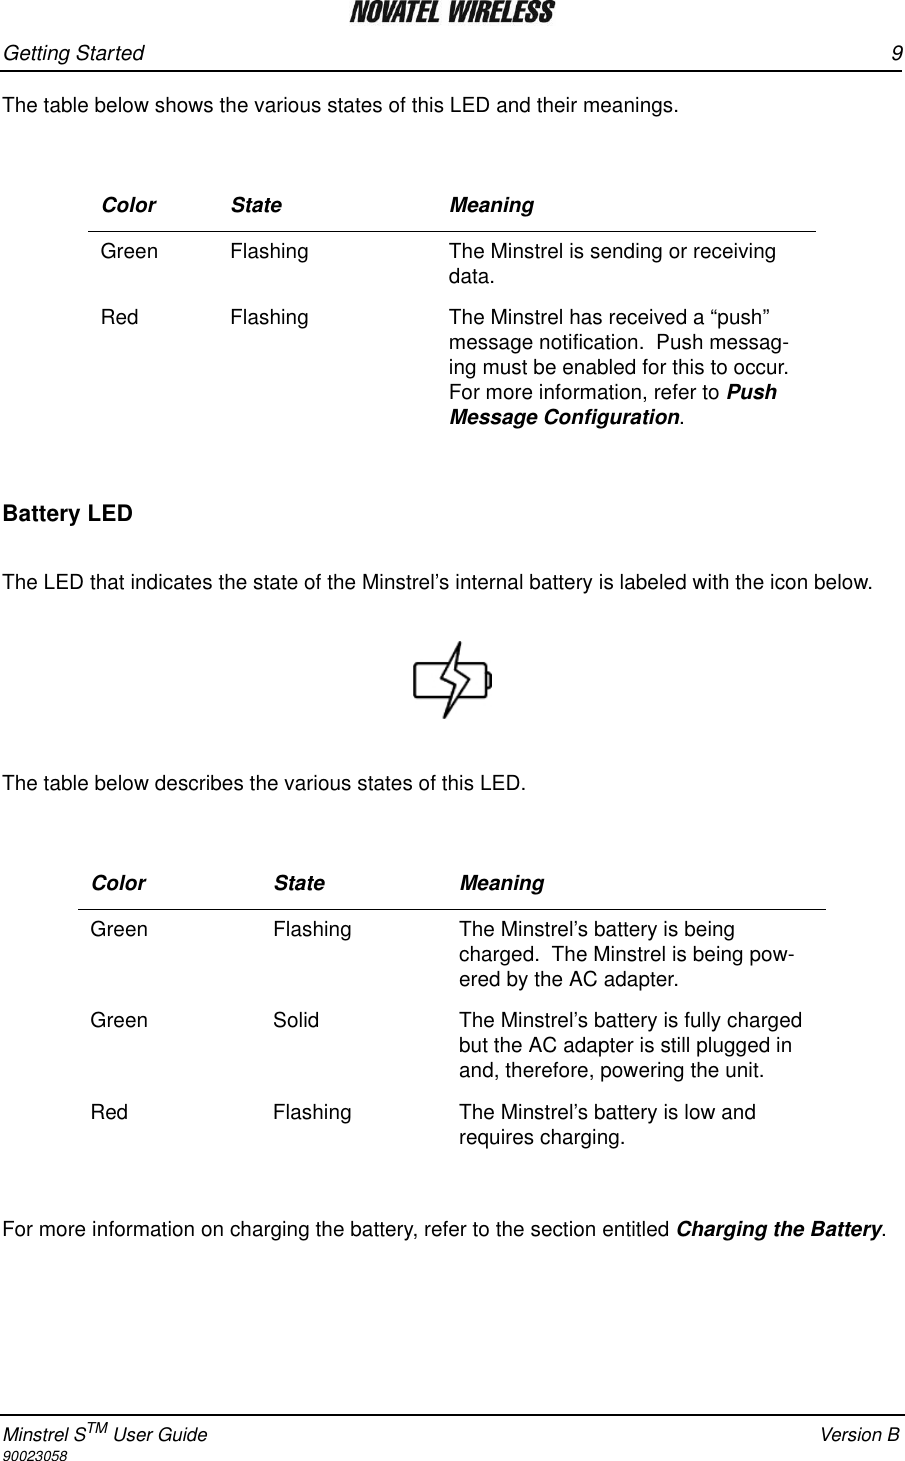 Getting Started 9Minstrel STM User Guide Version B90023058The table below shows the various states of this LED and their meanings.Battery LEDThe LED that indicates the state of the Minstrel’s internal battery is labeled with the icon below.The table below describes the various states of this LED.For more information on charging the battery, refer to the section entitled Charging the Battery.Color State MeaningGreen Flashing The Minstrel is sending or receiving data.  Red Flashing The Minstrel has received a “push” message notification.  Push messag-ing must be enabled for this to occur.  For more information, refer to Push Message Configuration.Color State MeaningGreen Flashing The Minstrel’s battery is being charged.  The Minstrel is being pow-ered by the AC adapter.Green Solid The Minstrel’s battery is fully charged but the AC adapter is still plugged in and, therefore, powering the unit.Red Flashing The Minstrel’s battery is low and requires charging.